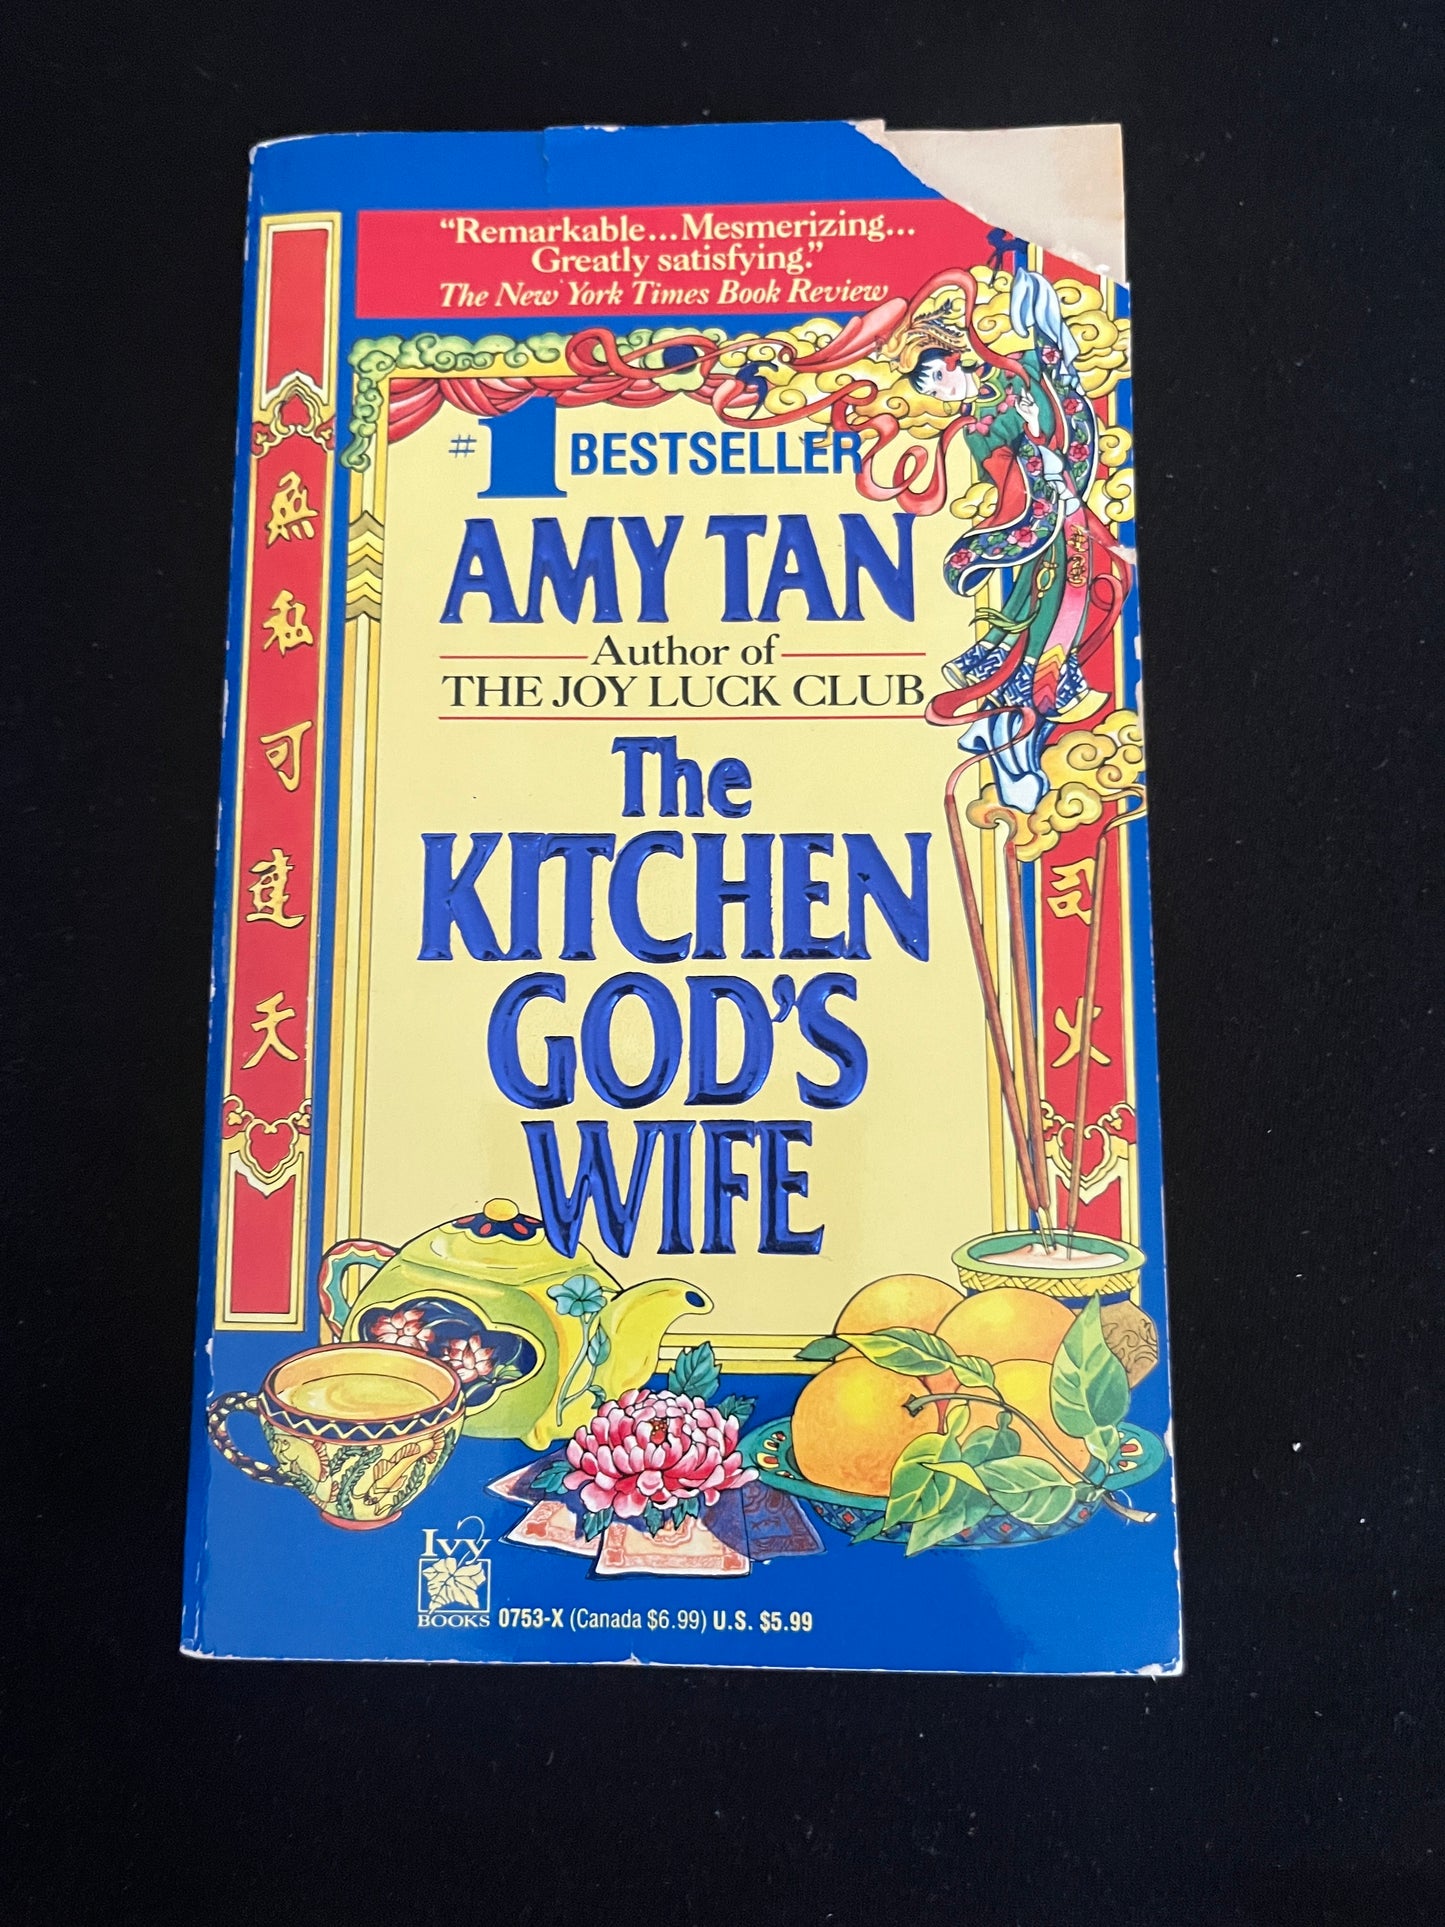 THE KITCHEN GOD'S WIFE by Amy Tan